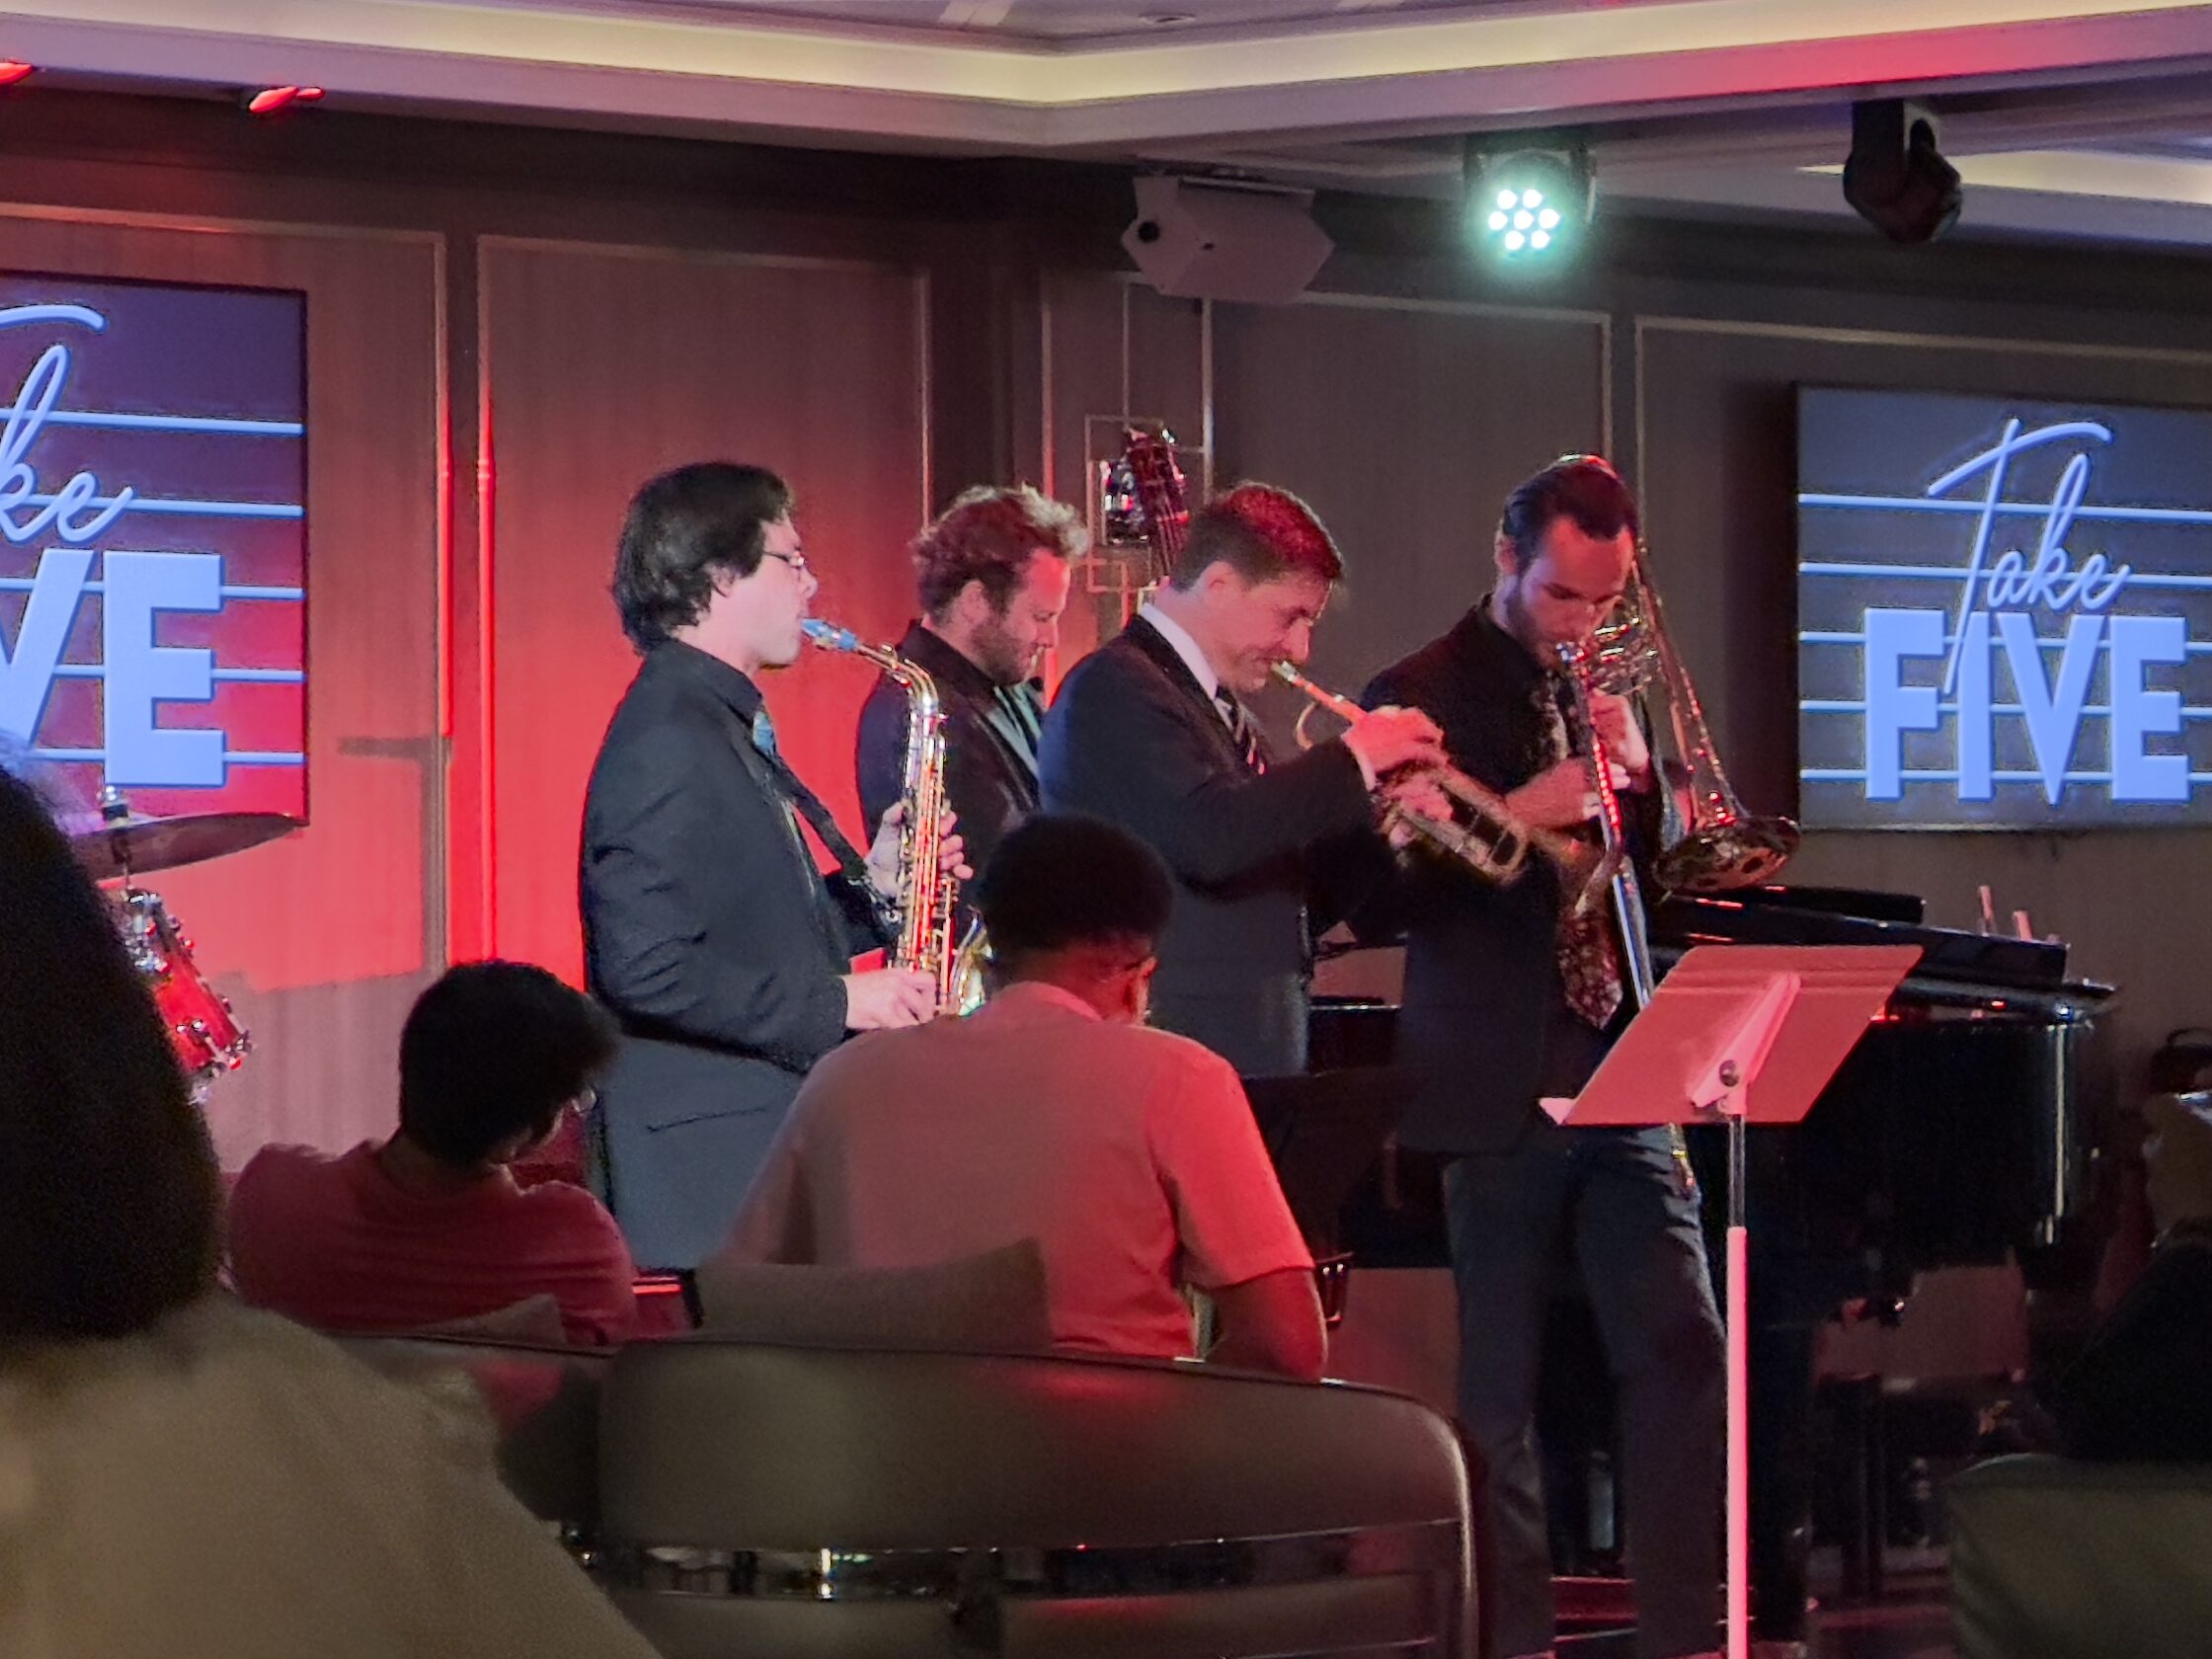 The jazz band offering up some classic favourites at Take Five - a great evening spot on our Western Caribbean Cruise